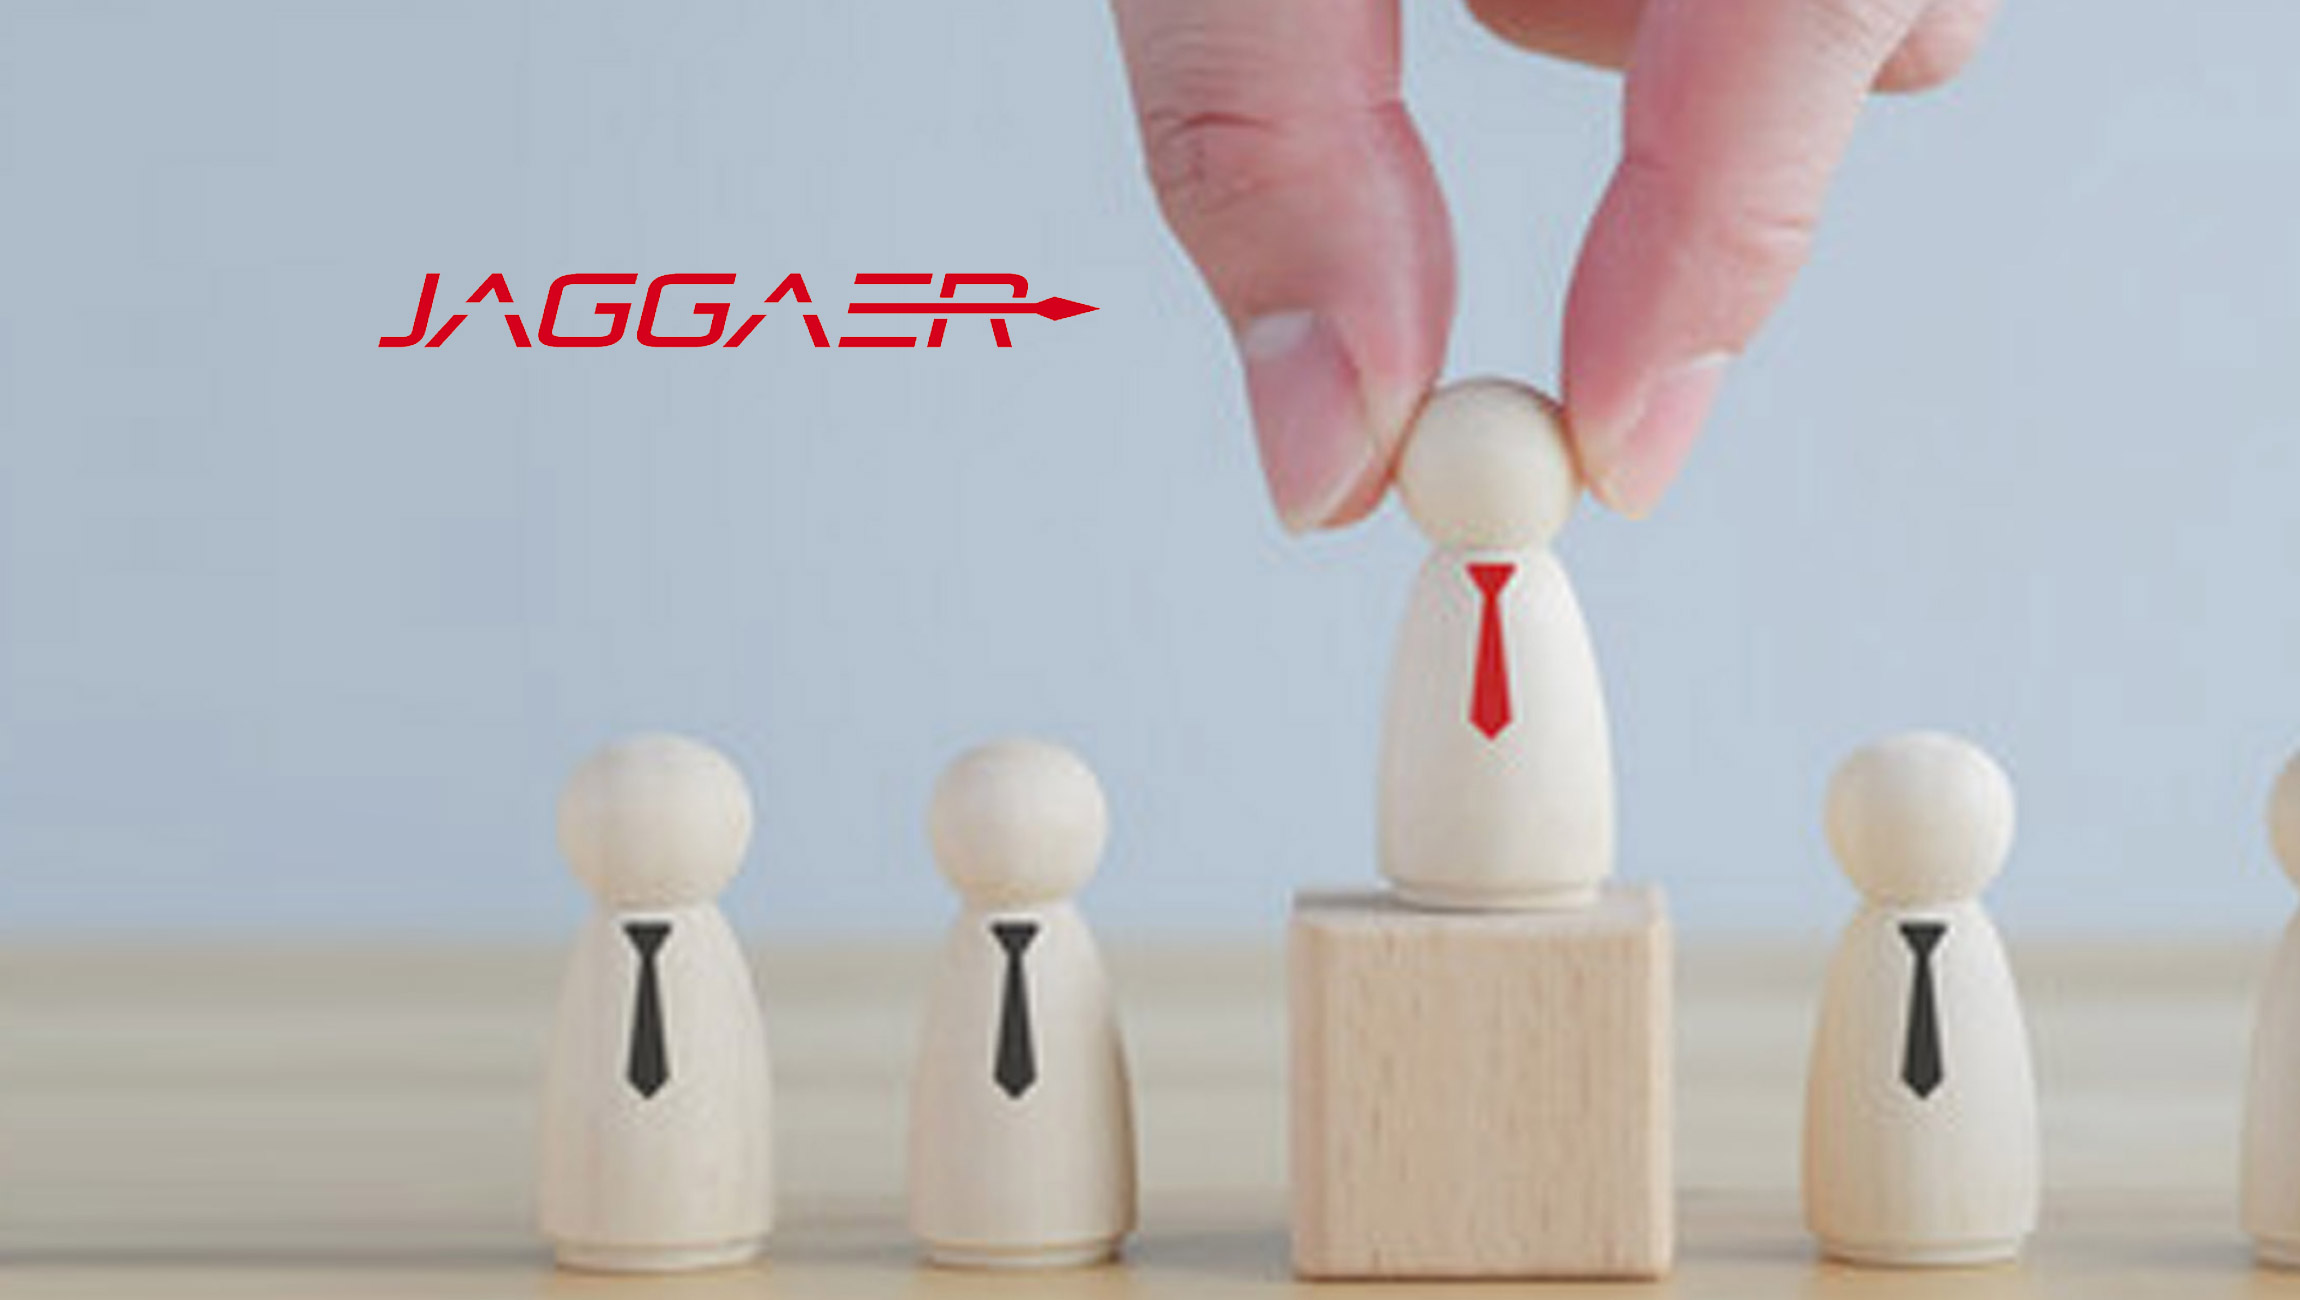 JAGGAER Named a Leader in the 2022 Gartner Magic Quadrant for Procure-to-Pay Suites for the Fifth Straight Year